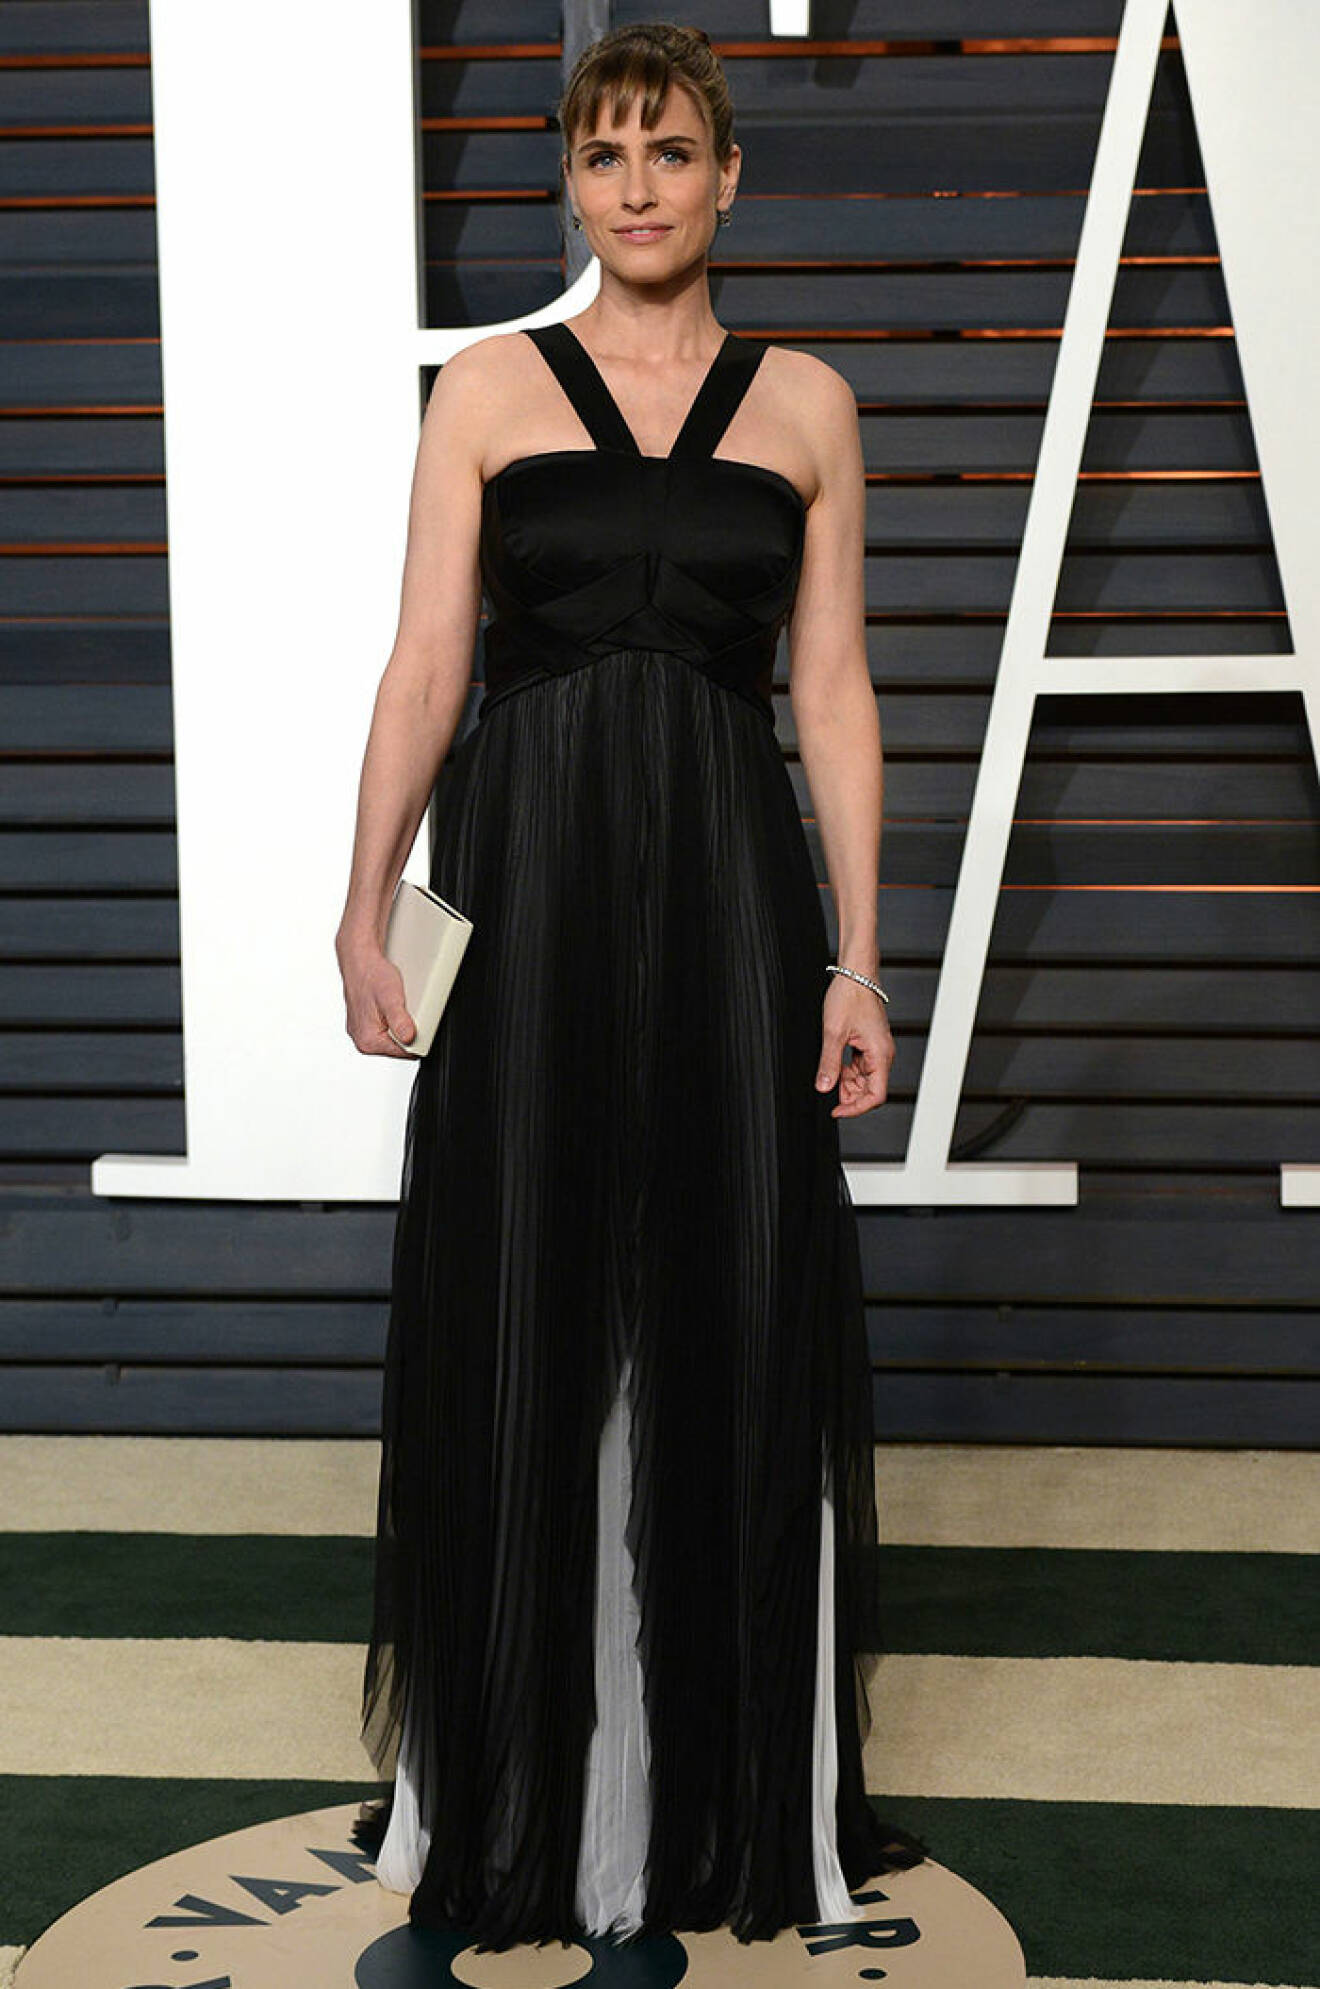 The 2015 Vanity Fair Oscar Viewing Party